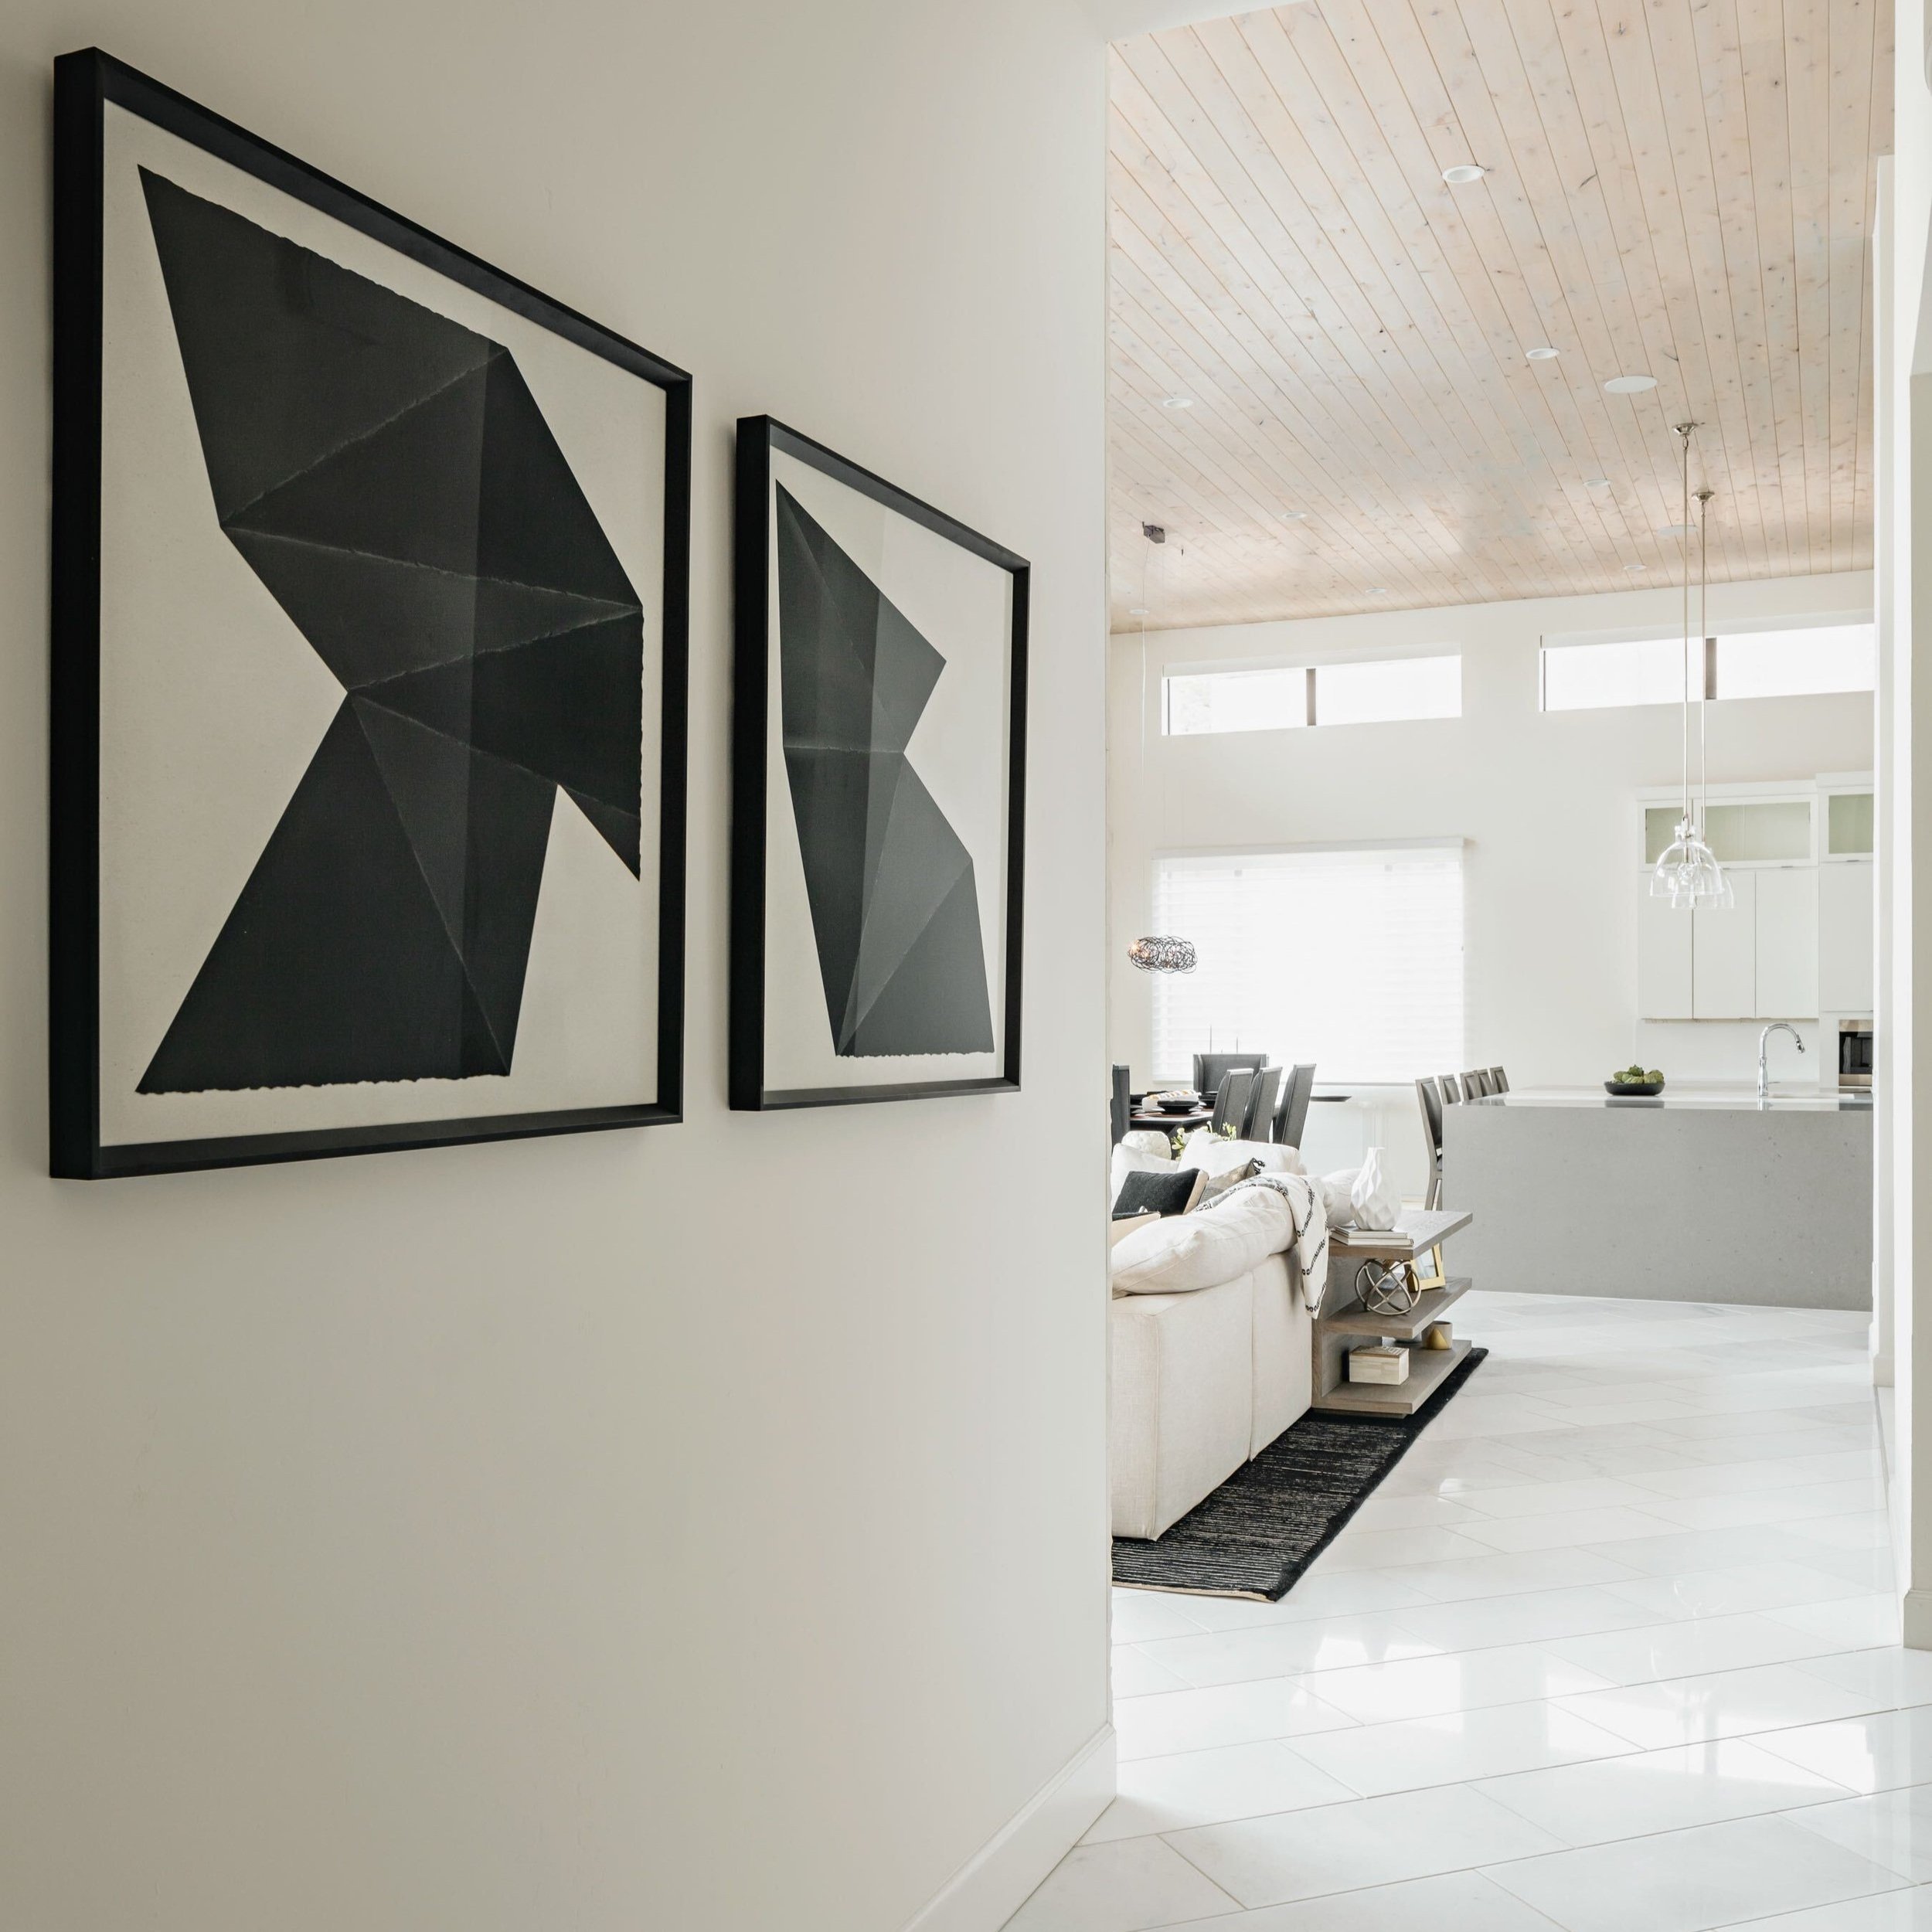  Framed black and white wall art in a luxurious, monochromatic home remodel.  